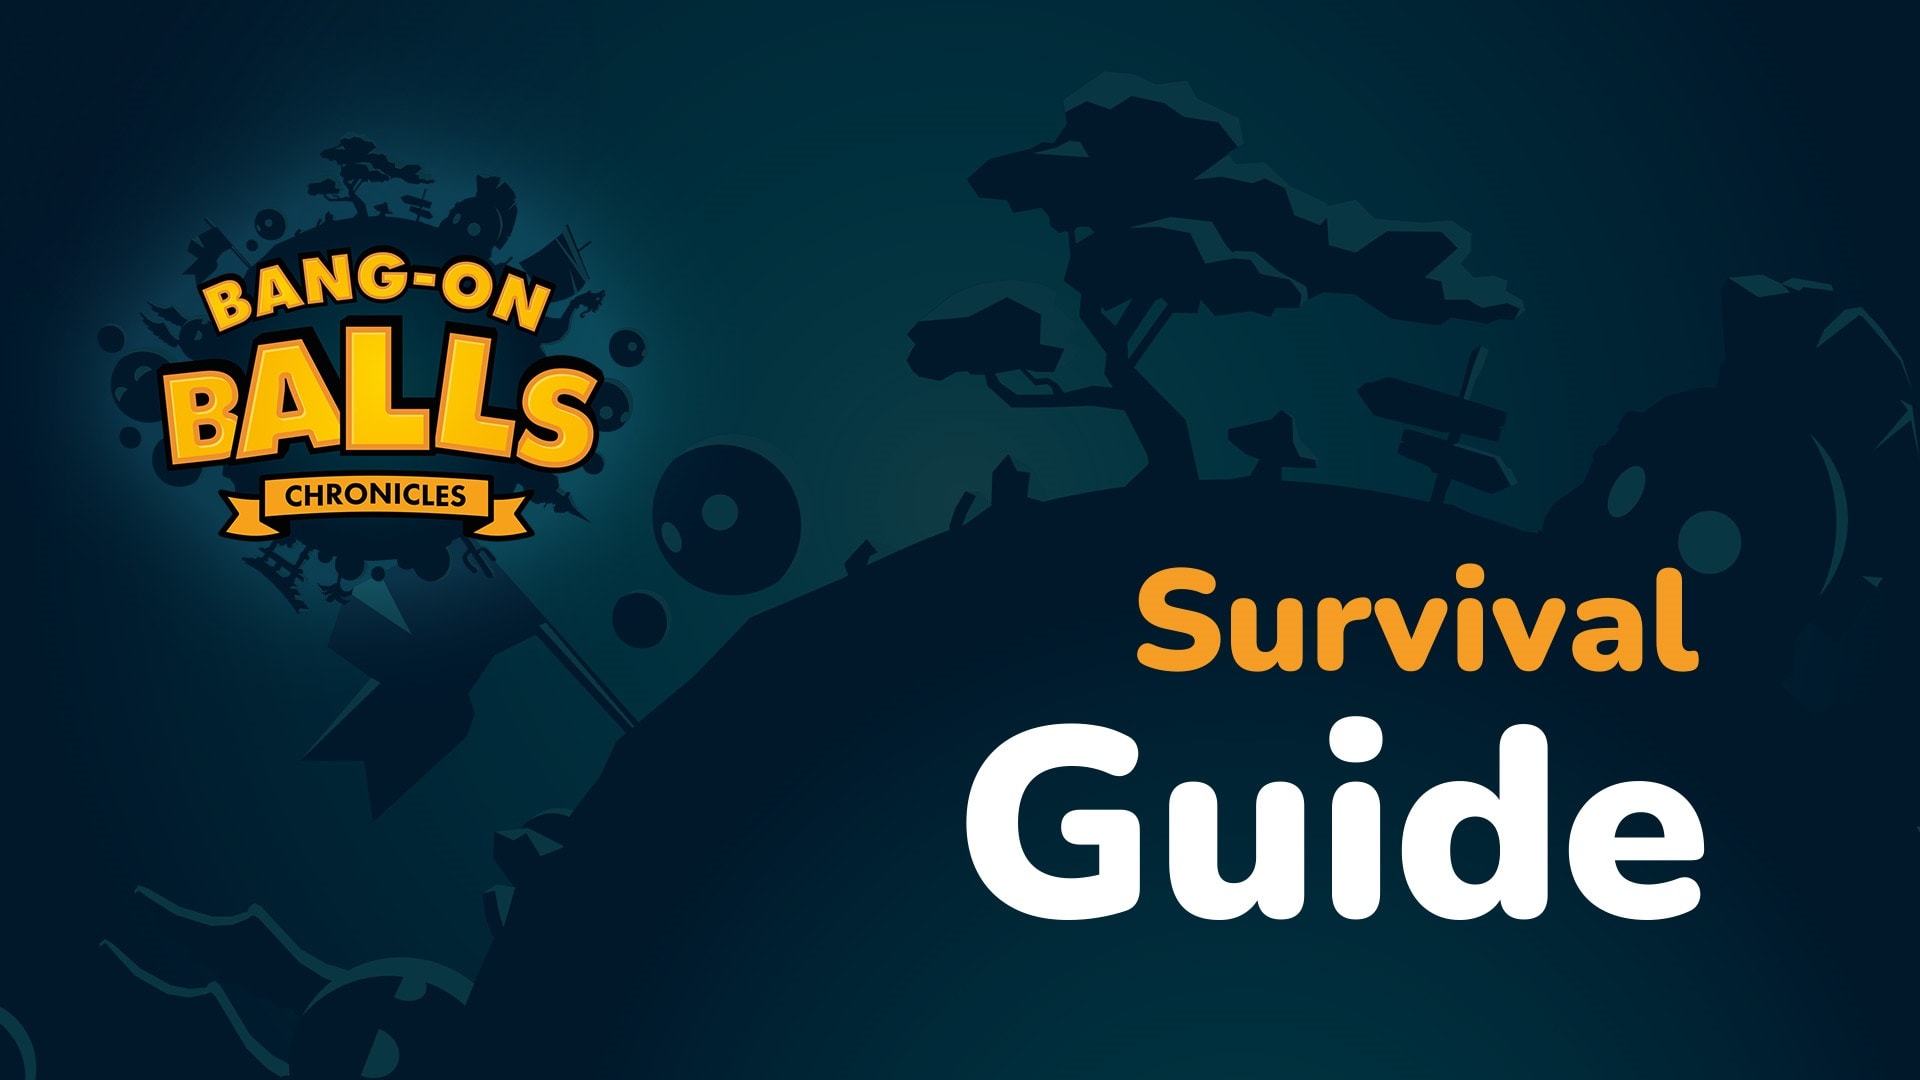 The Bang-On Balls: Chronicles Survival Guide 